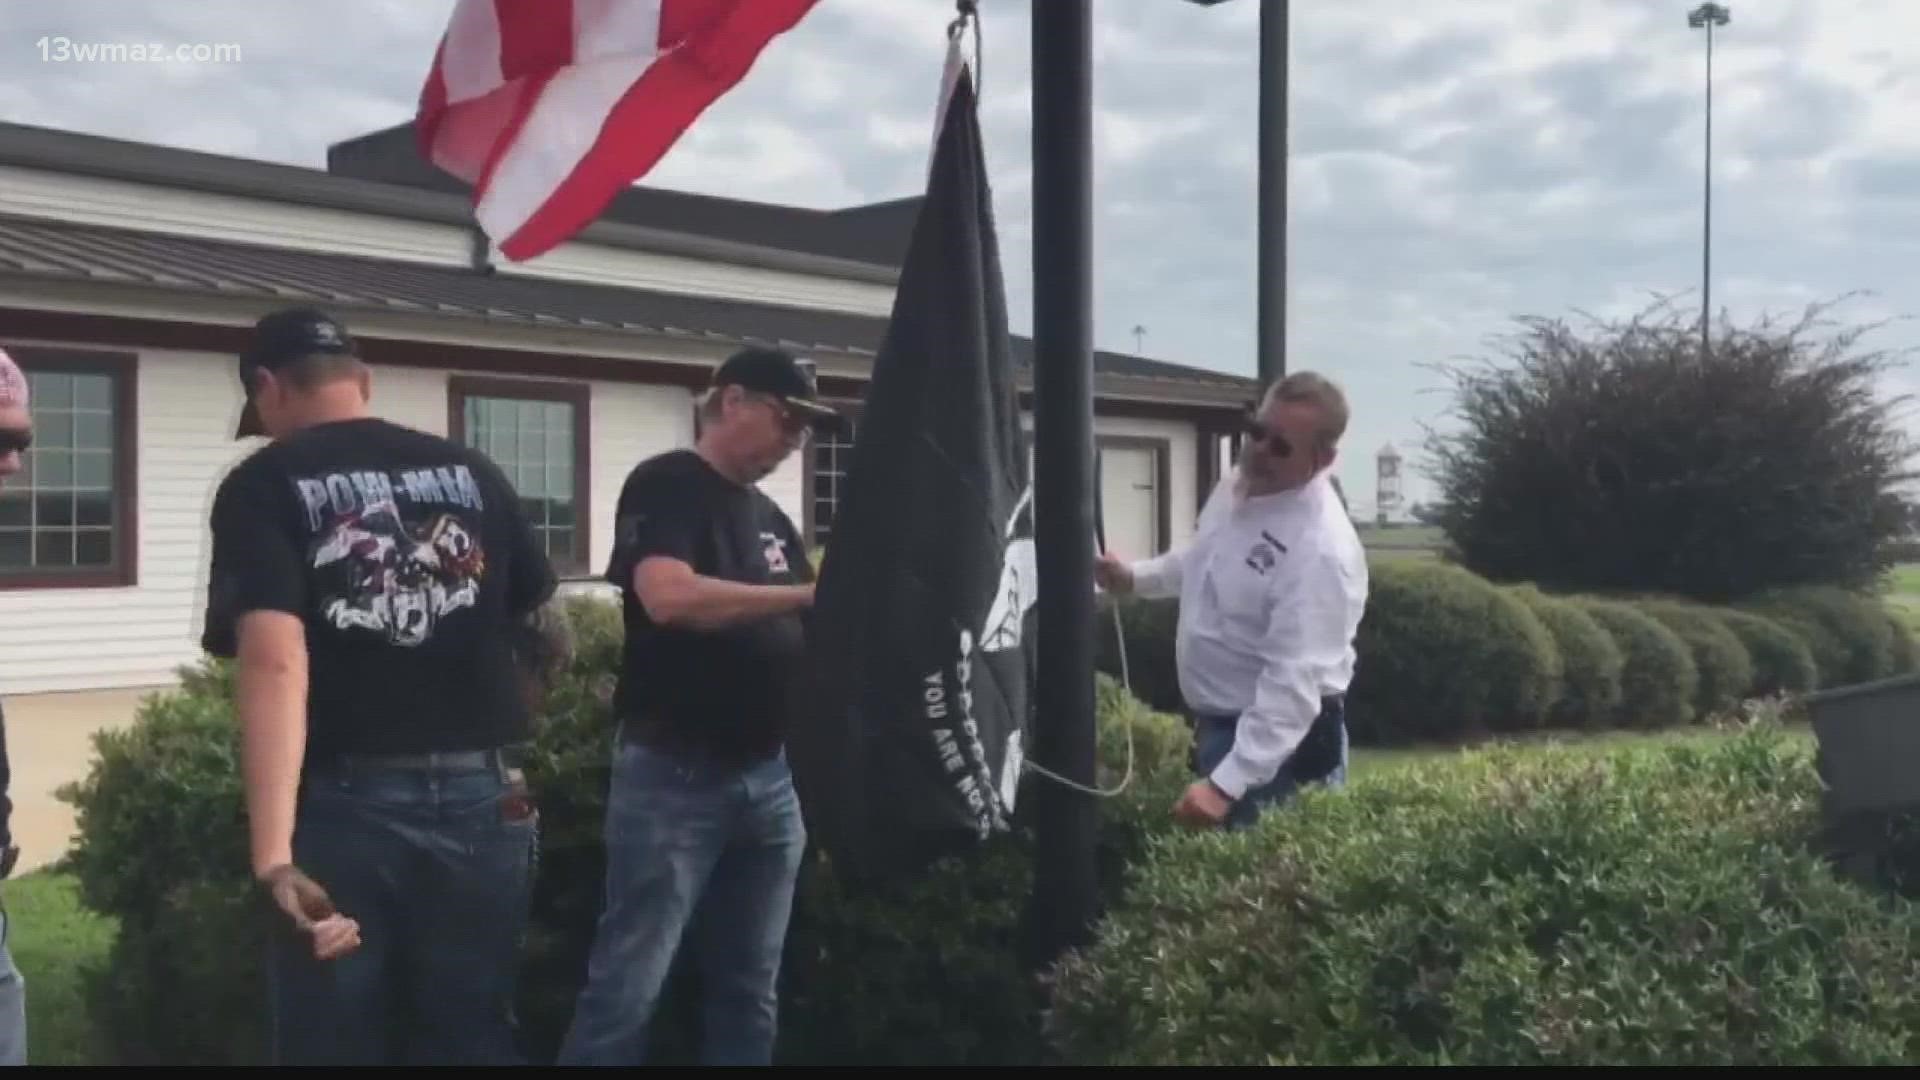 Rolling Thunder hosted the event as part of the POW/MIA Week.